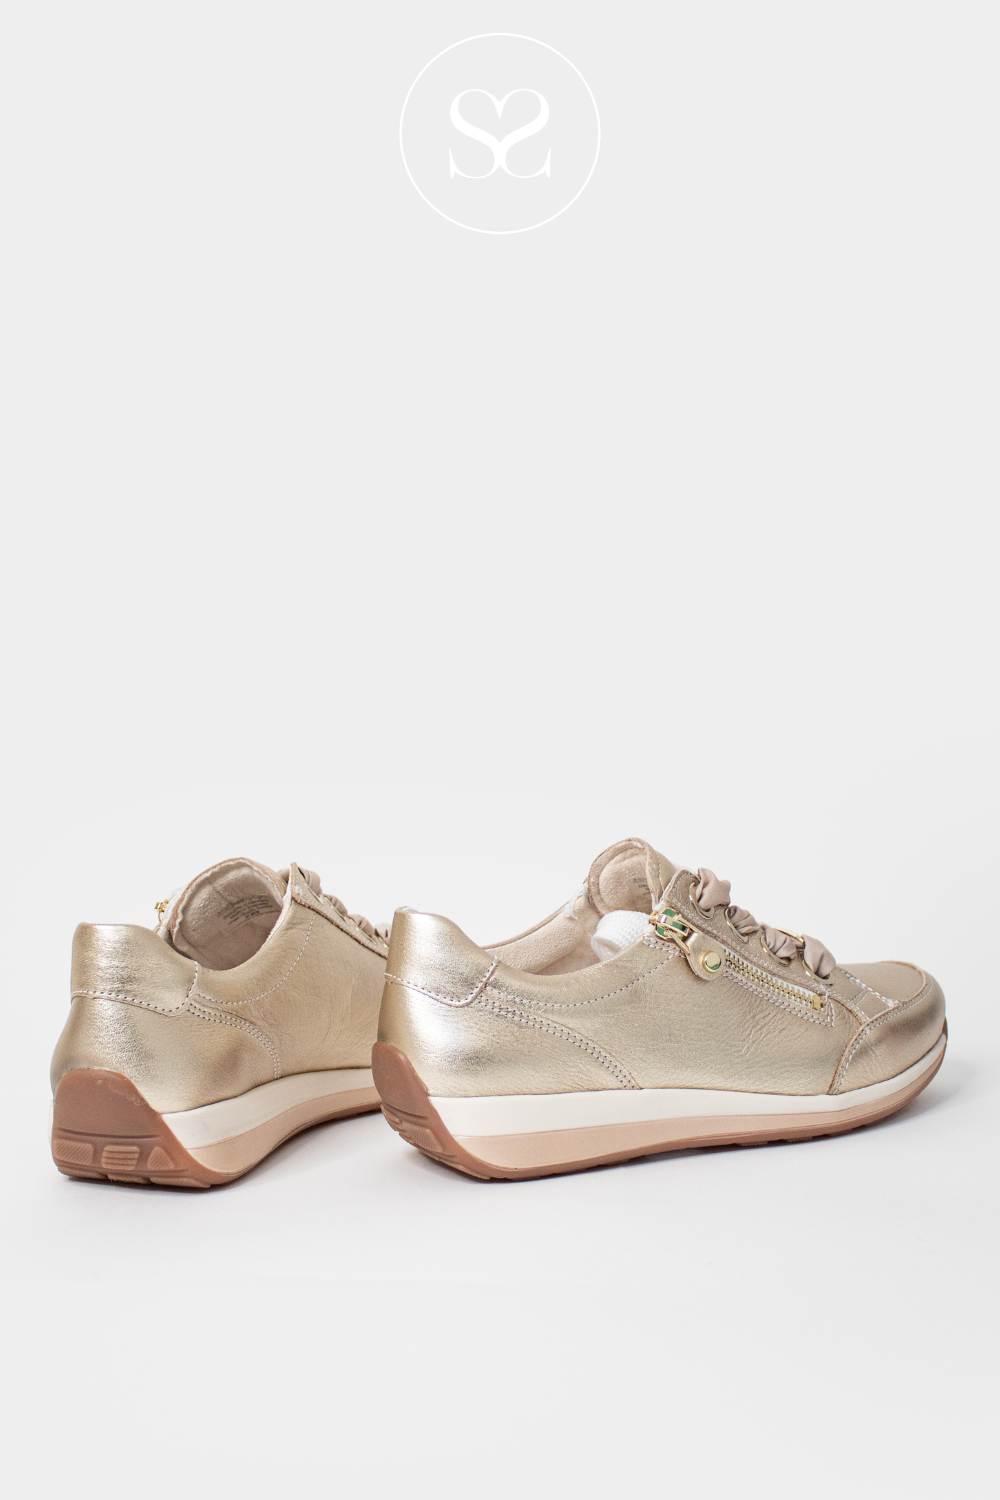 ARA GOLD LEATHER WALKING TRAINERS WITH FABRIC LACES AND SIDE ZIP. sOFT CUSHIONED INSOLE